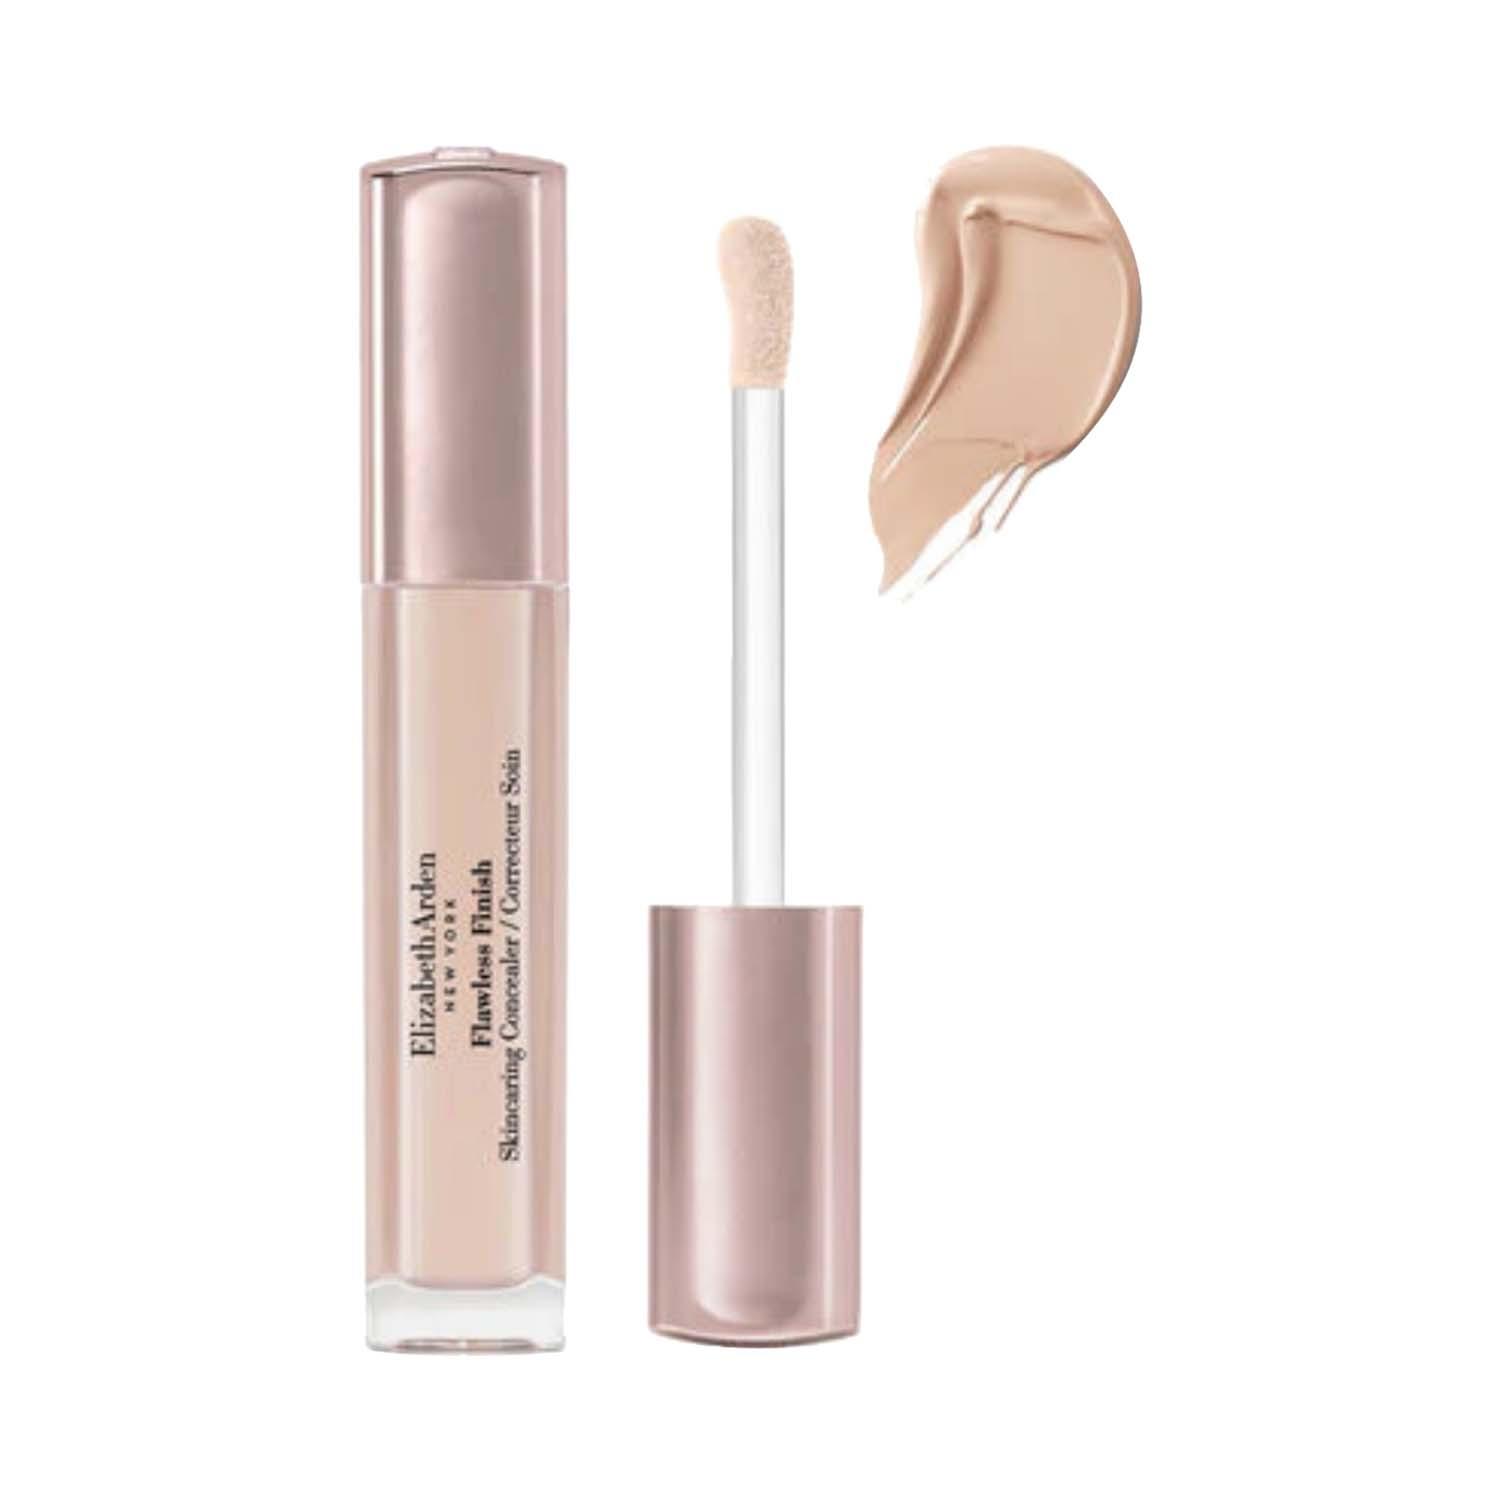 Elizabeth Arden | Flawless Finish Skincaring Concealer - Shade 2 - Light With Neutral Tones (7 ml)